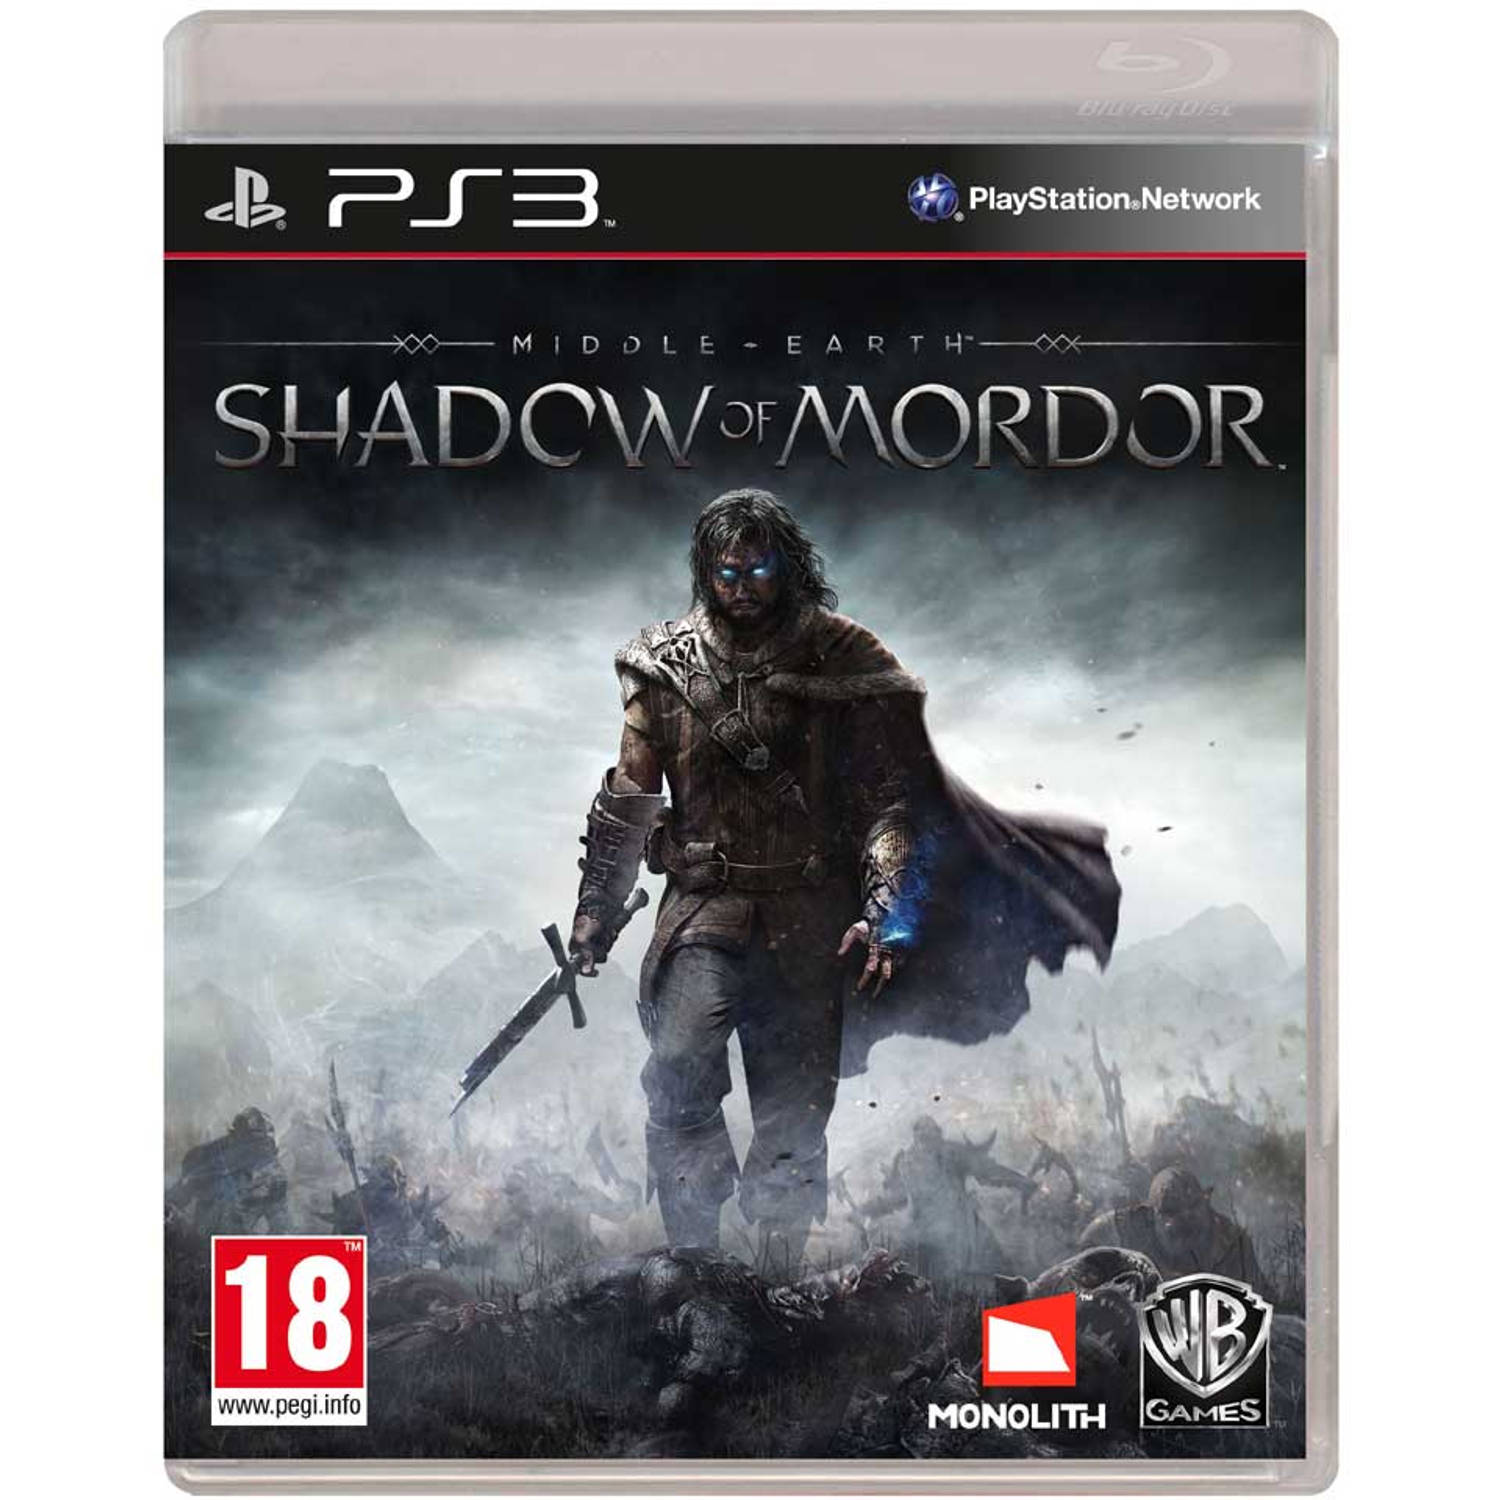 Ps3 Middle-earth: Shadow Of Mordor